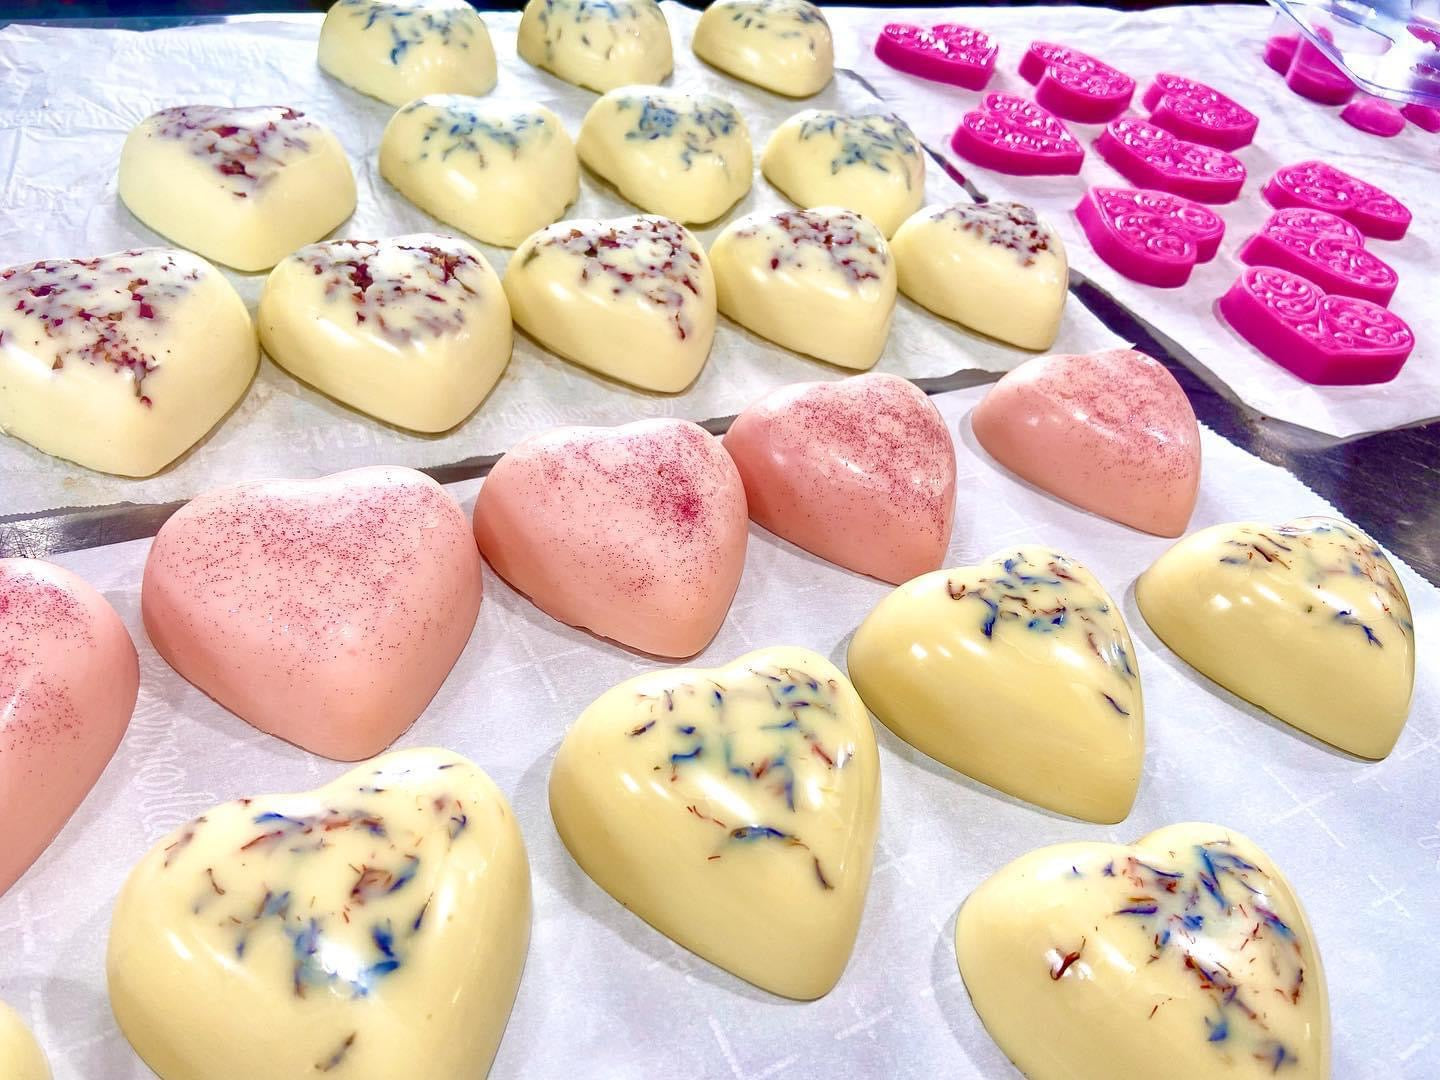 Heart Lotion Bar – Tennessee Candle Company